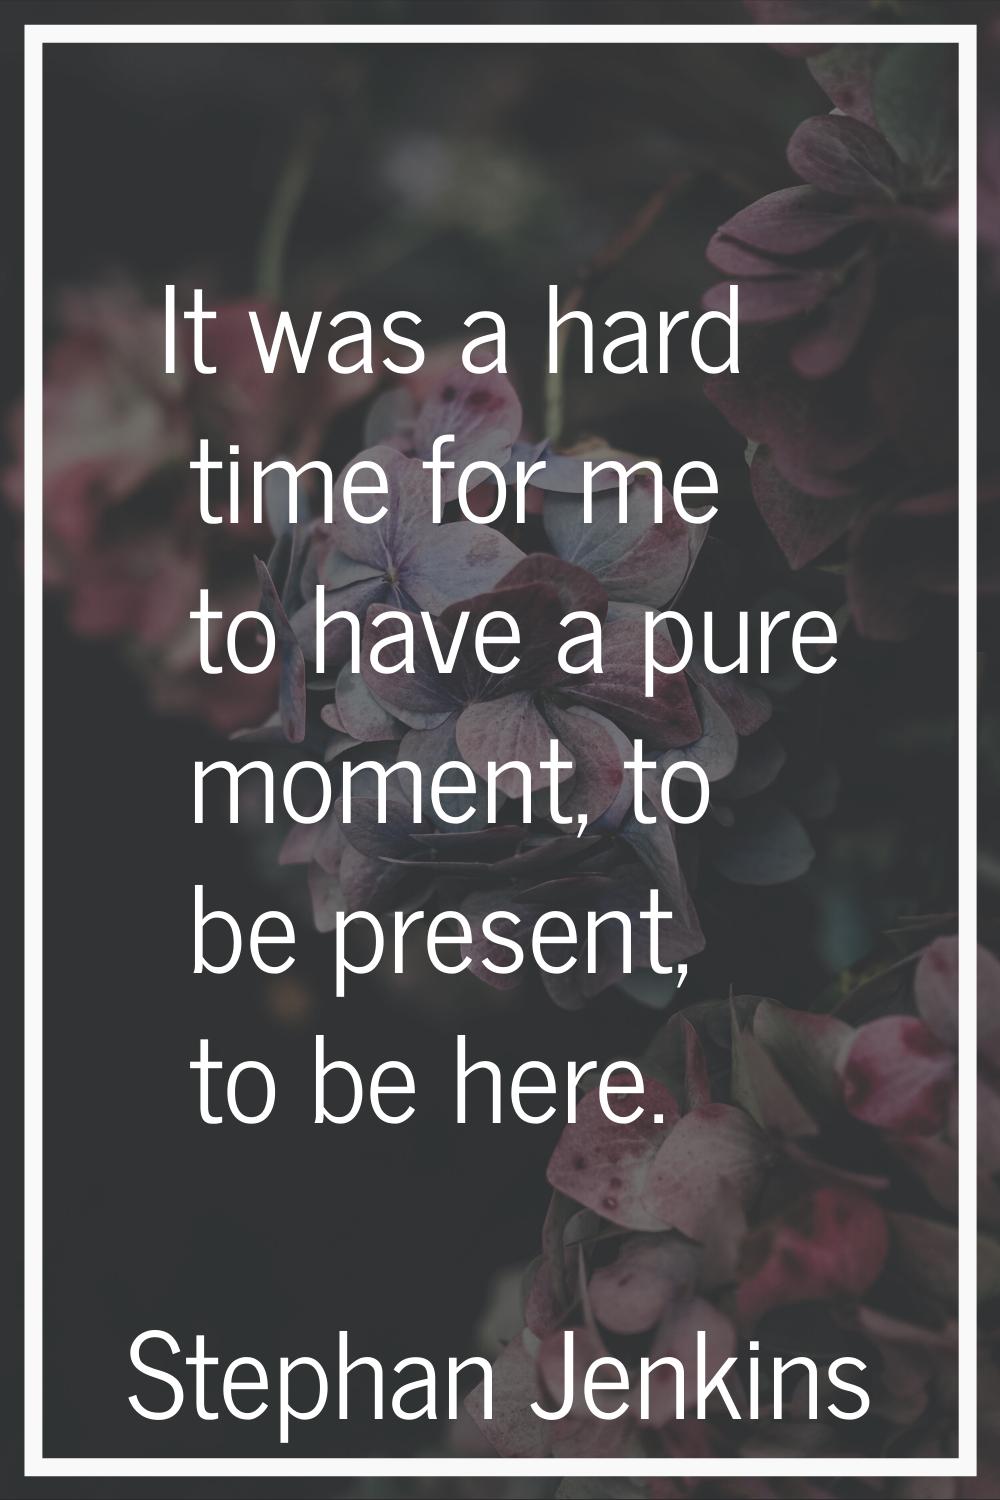 It was a hard time for me to have a pure moment, to be present, to be here.